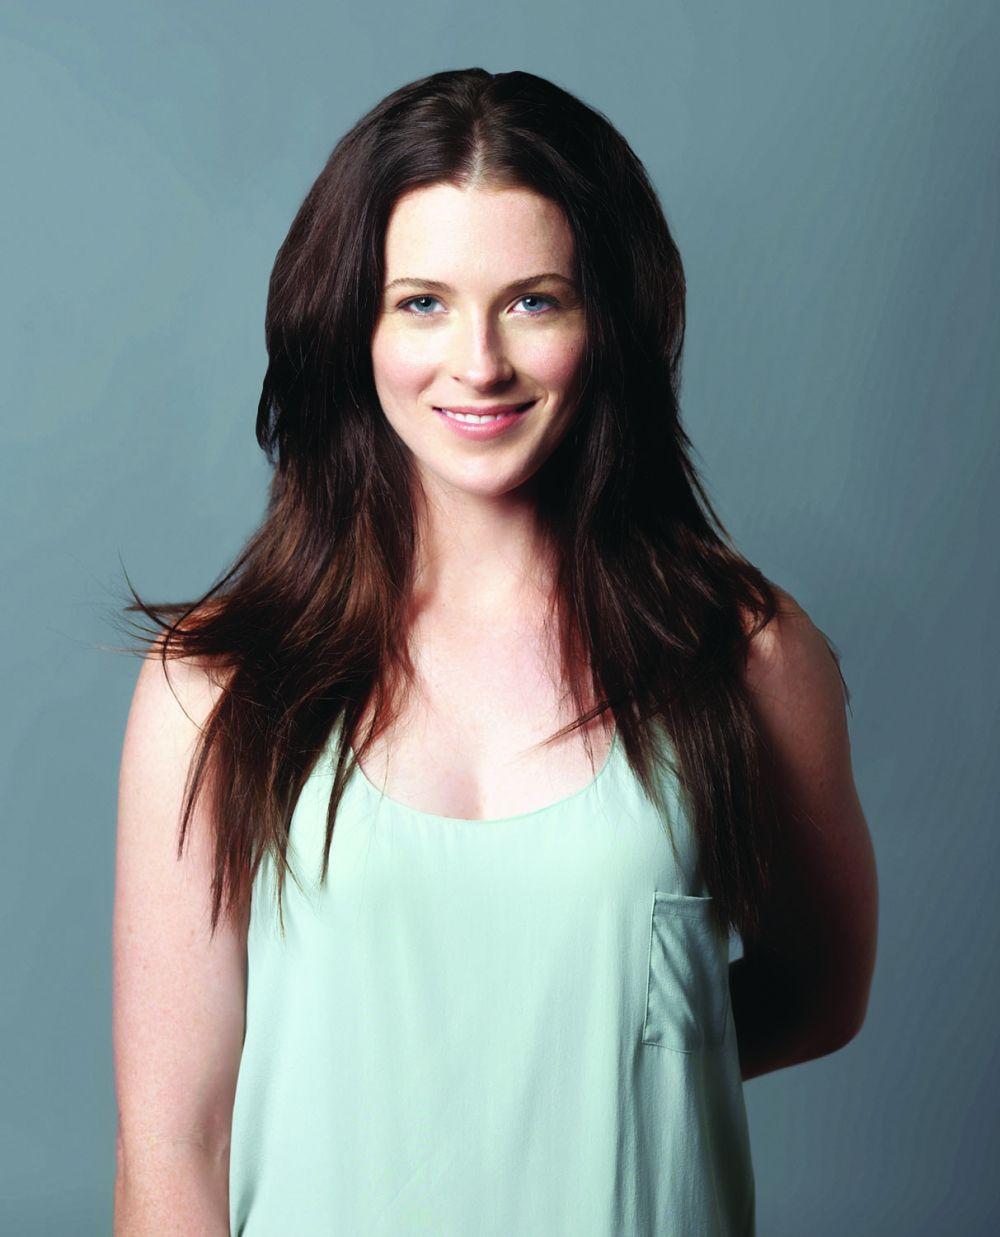 51 Hottest Bridget Regan Big Butt Pictures Will Drive You Wildly Enchanted With This Dashing Damsel 29